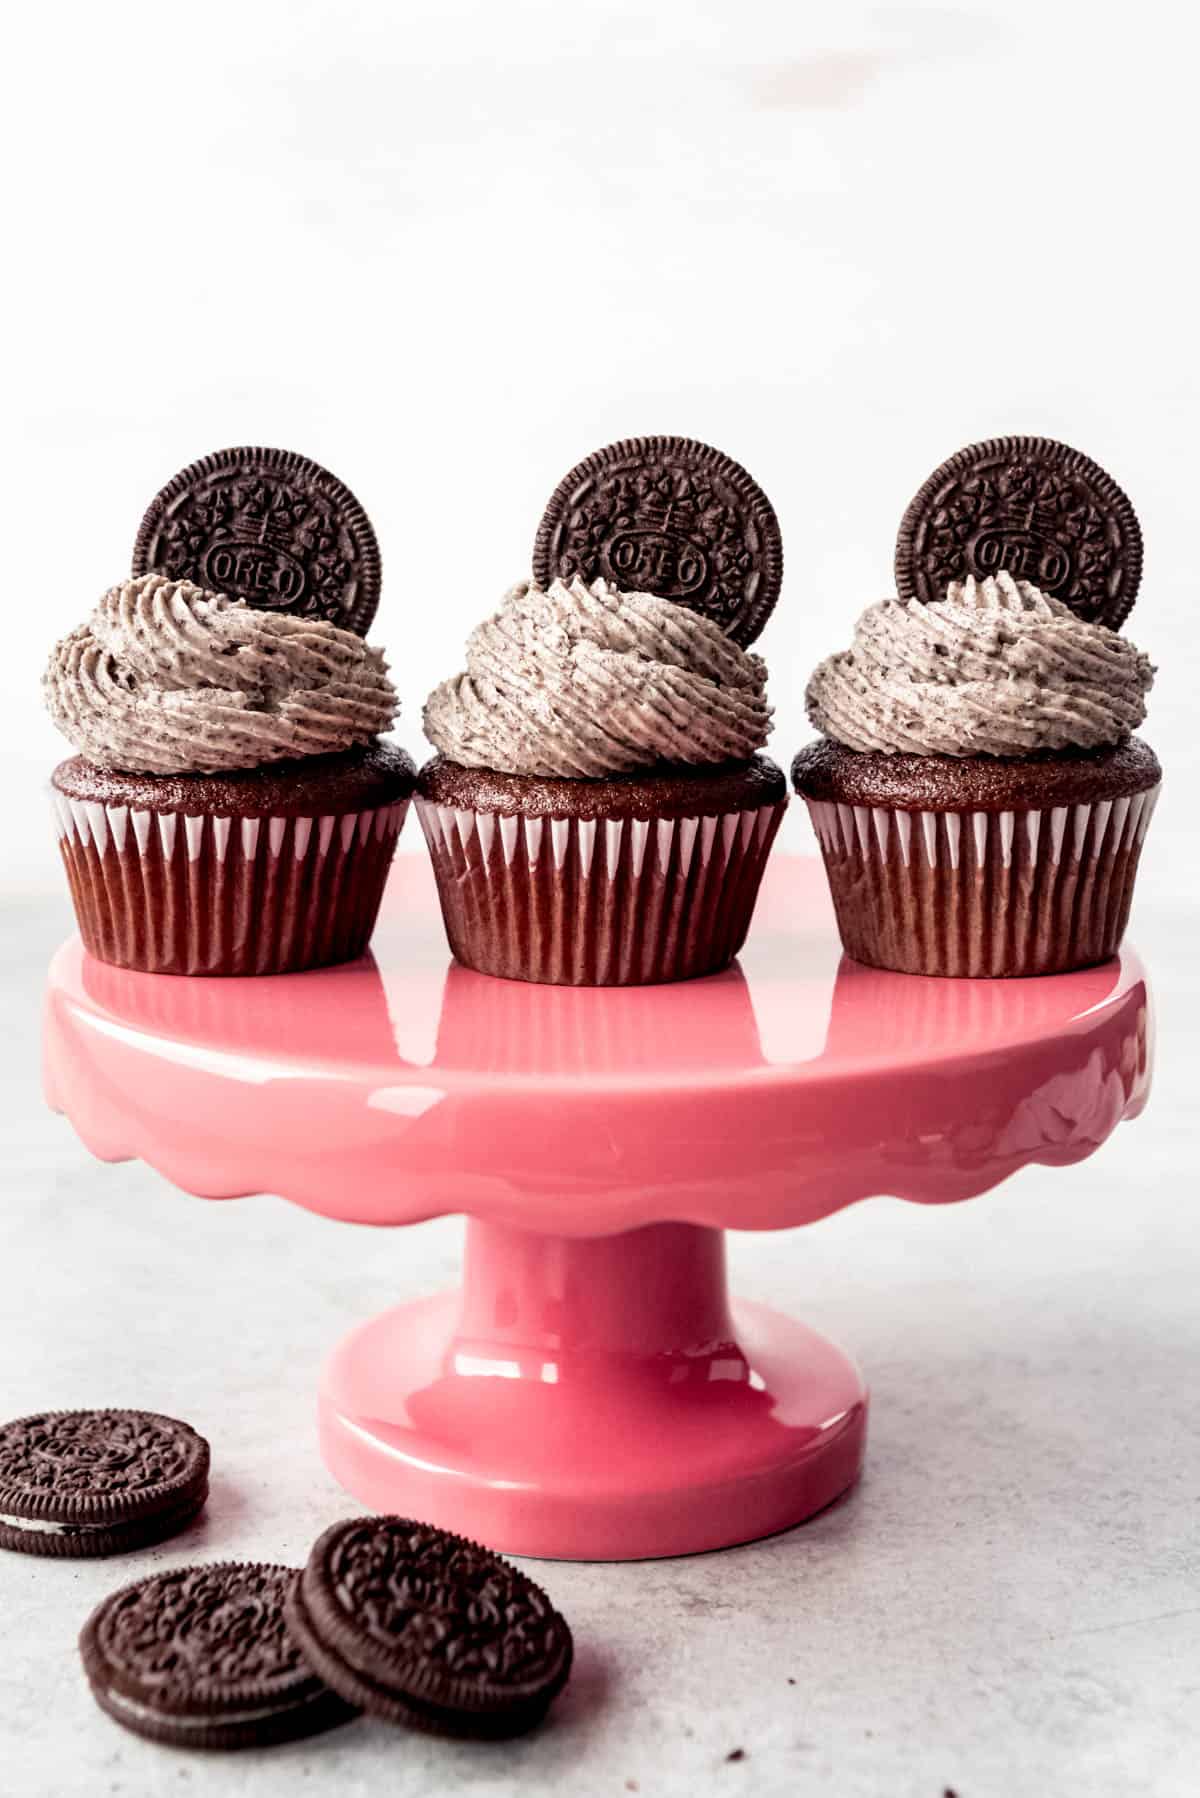 An image of three chocolate cupcakes on a red cake stand with swirls of cookies and cream frosting on top.